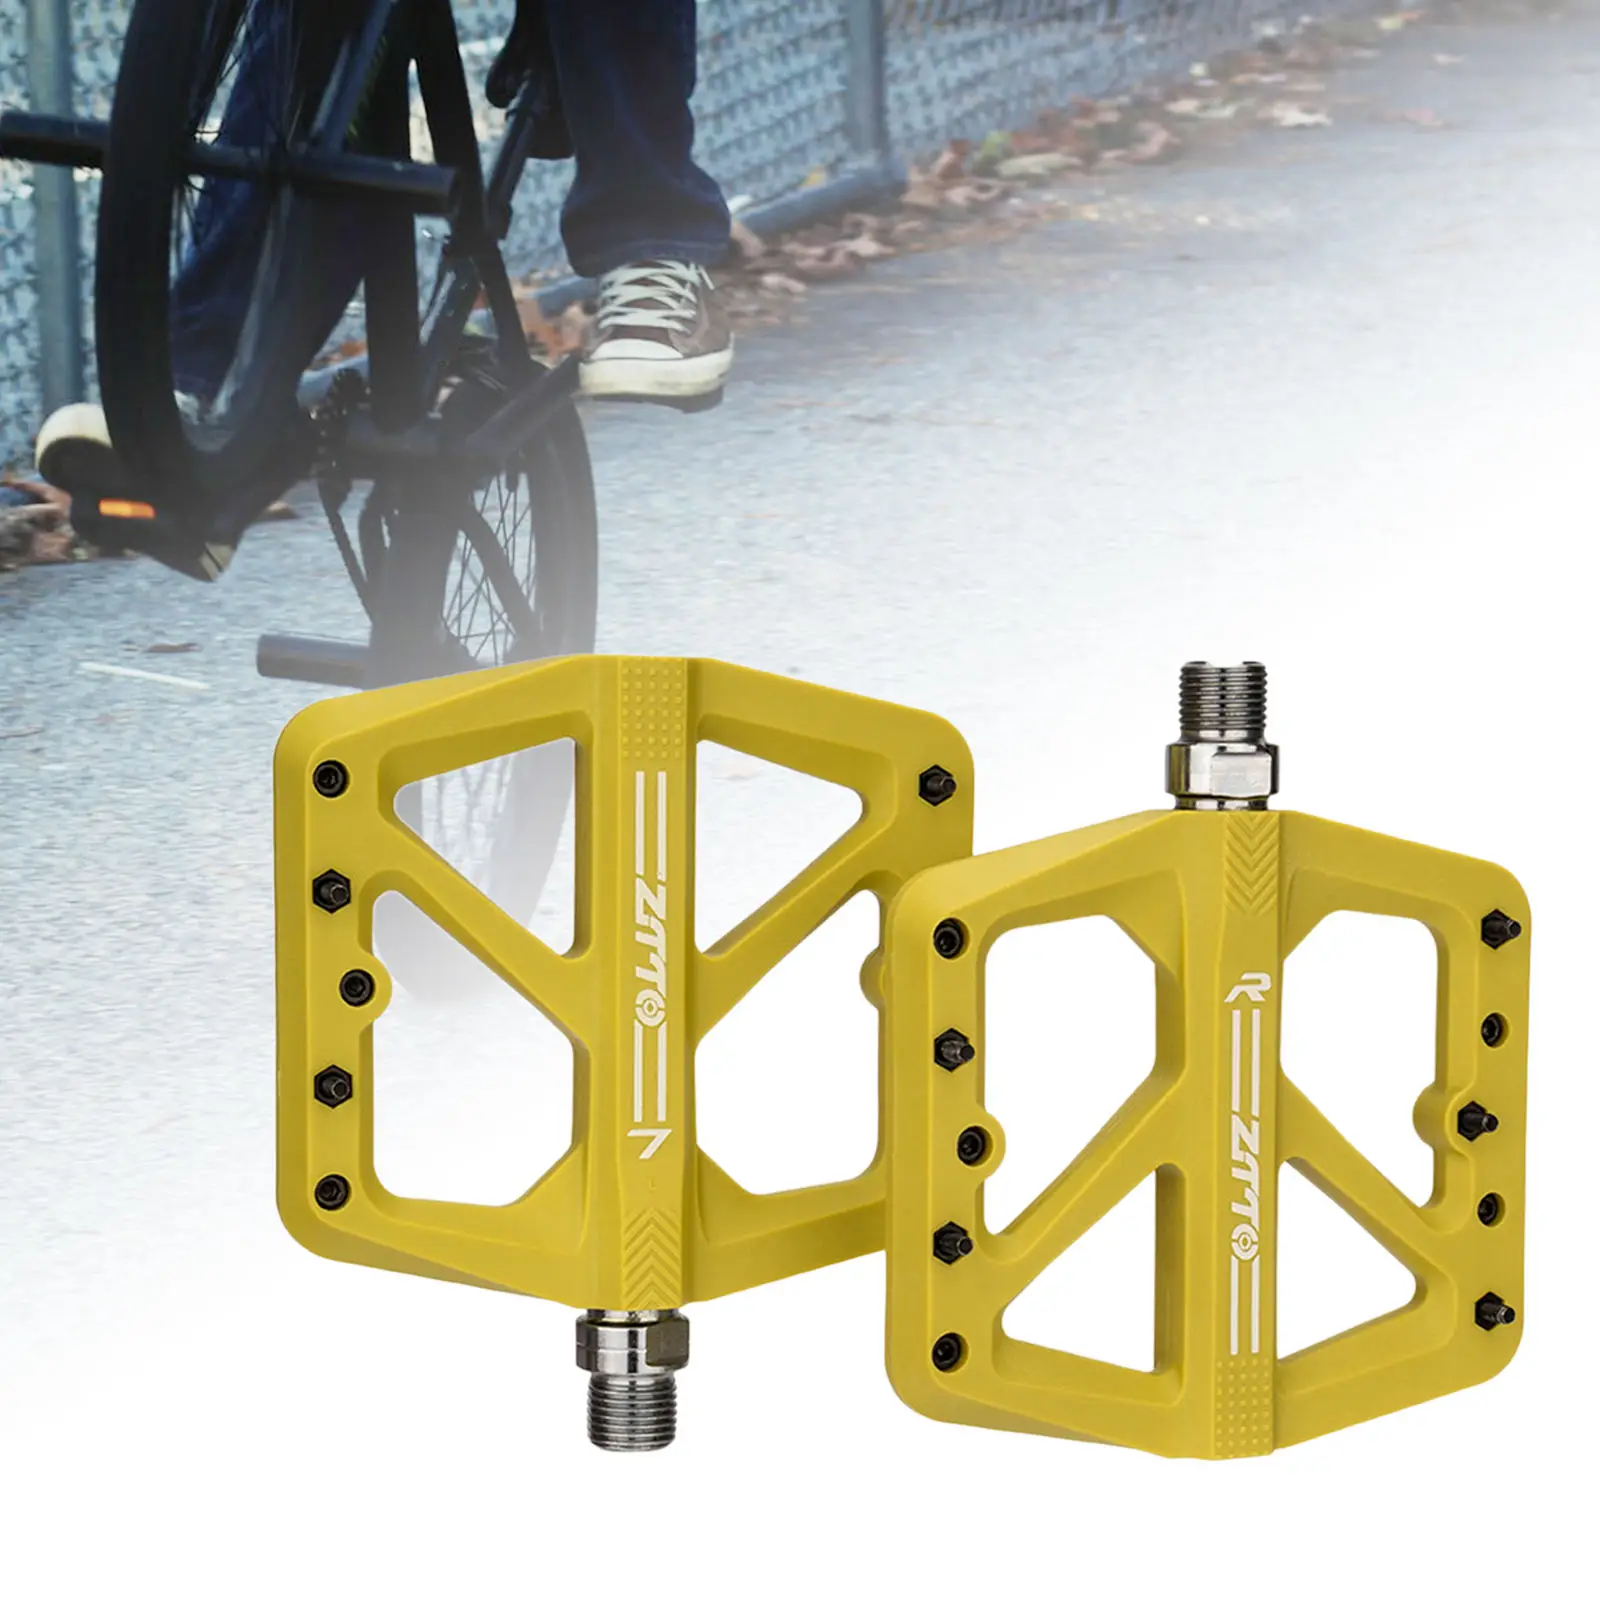 1 Pair Mountain Bike Pedals Nylon Composite Bearing MTB Bicycle Pedals with Wide Flat Platform